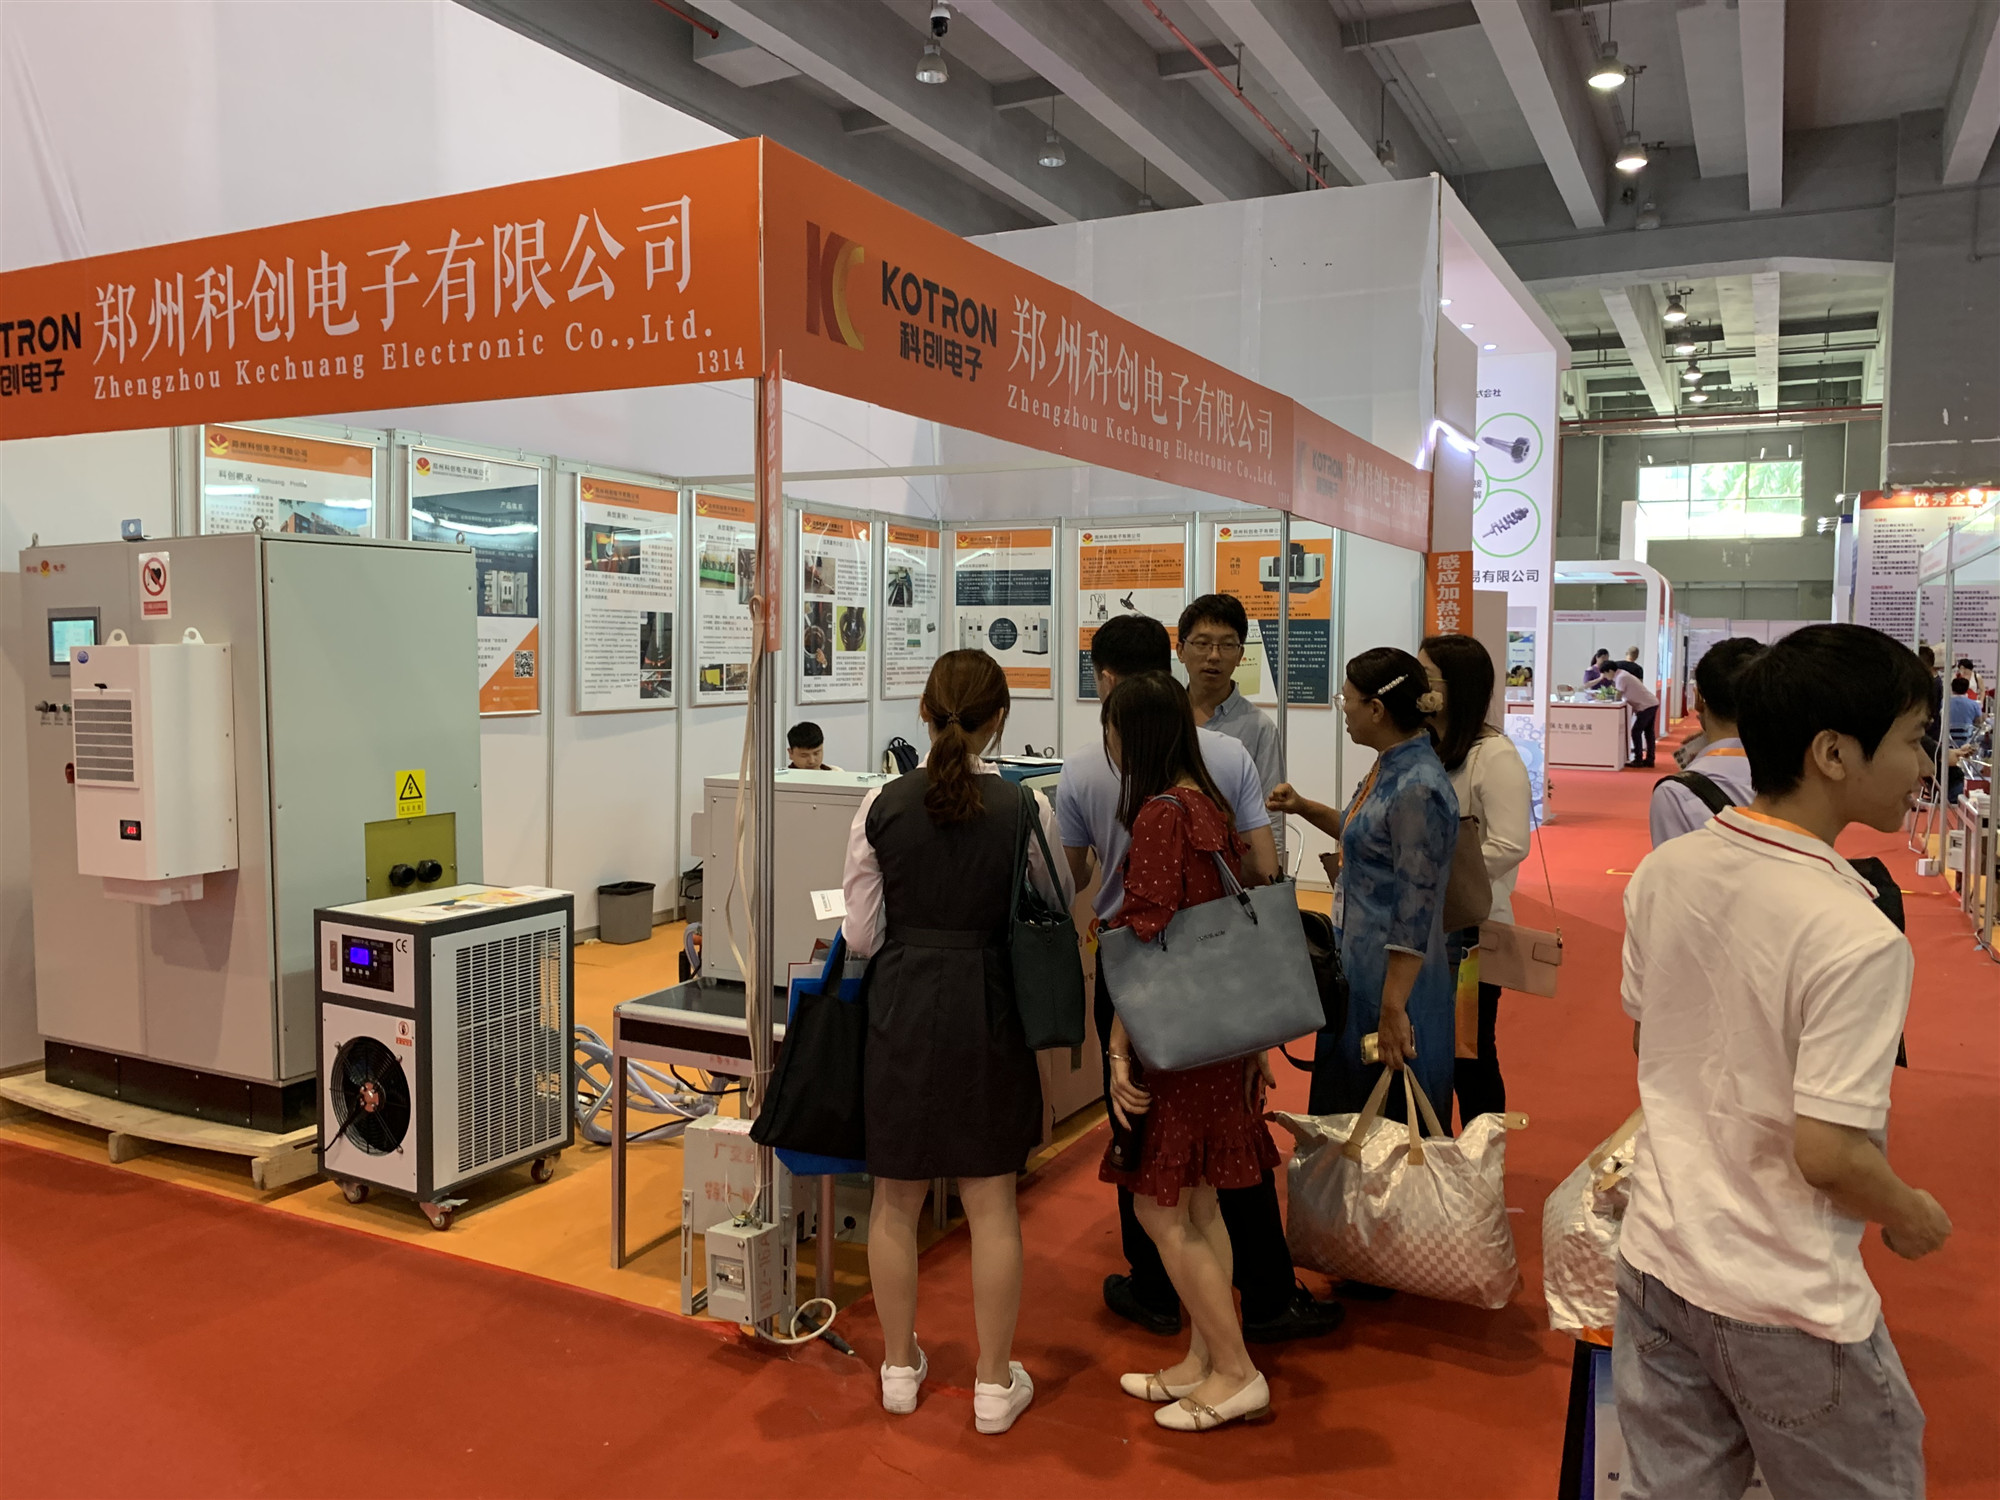 The 21st China international industry fair